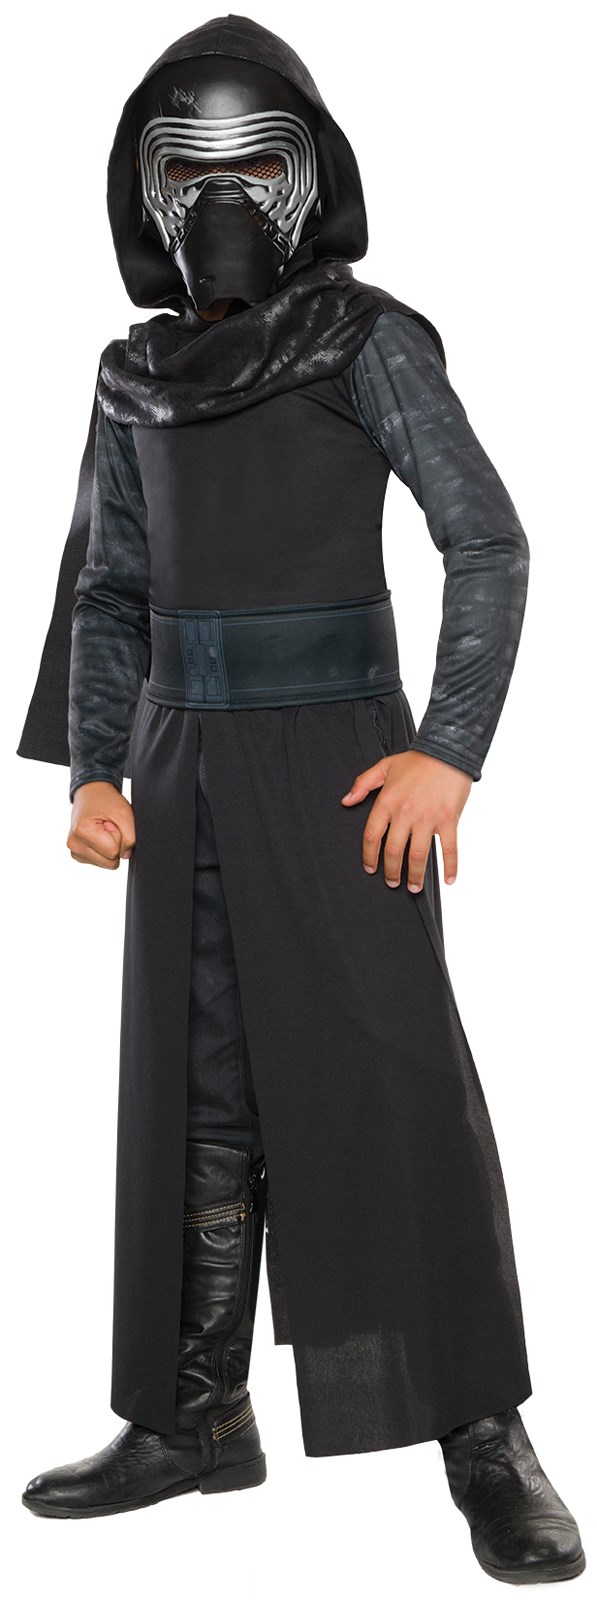 Star Wars Episode 7 - Classic Kylo Ren Costume For Boys